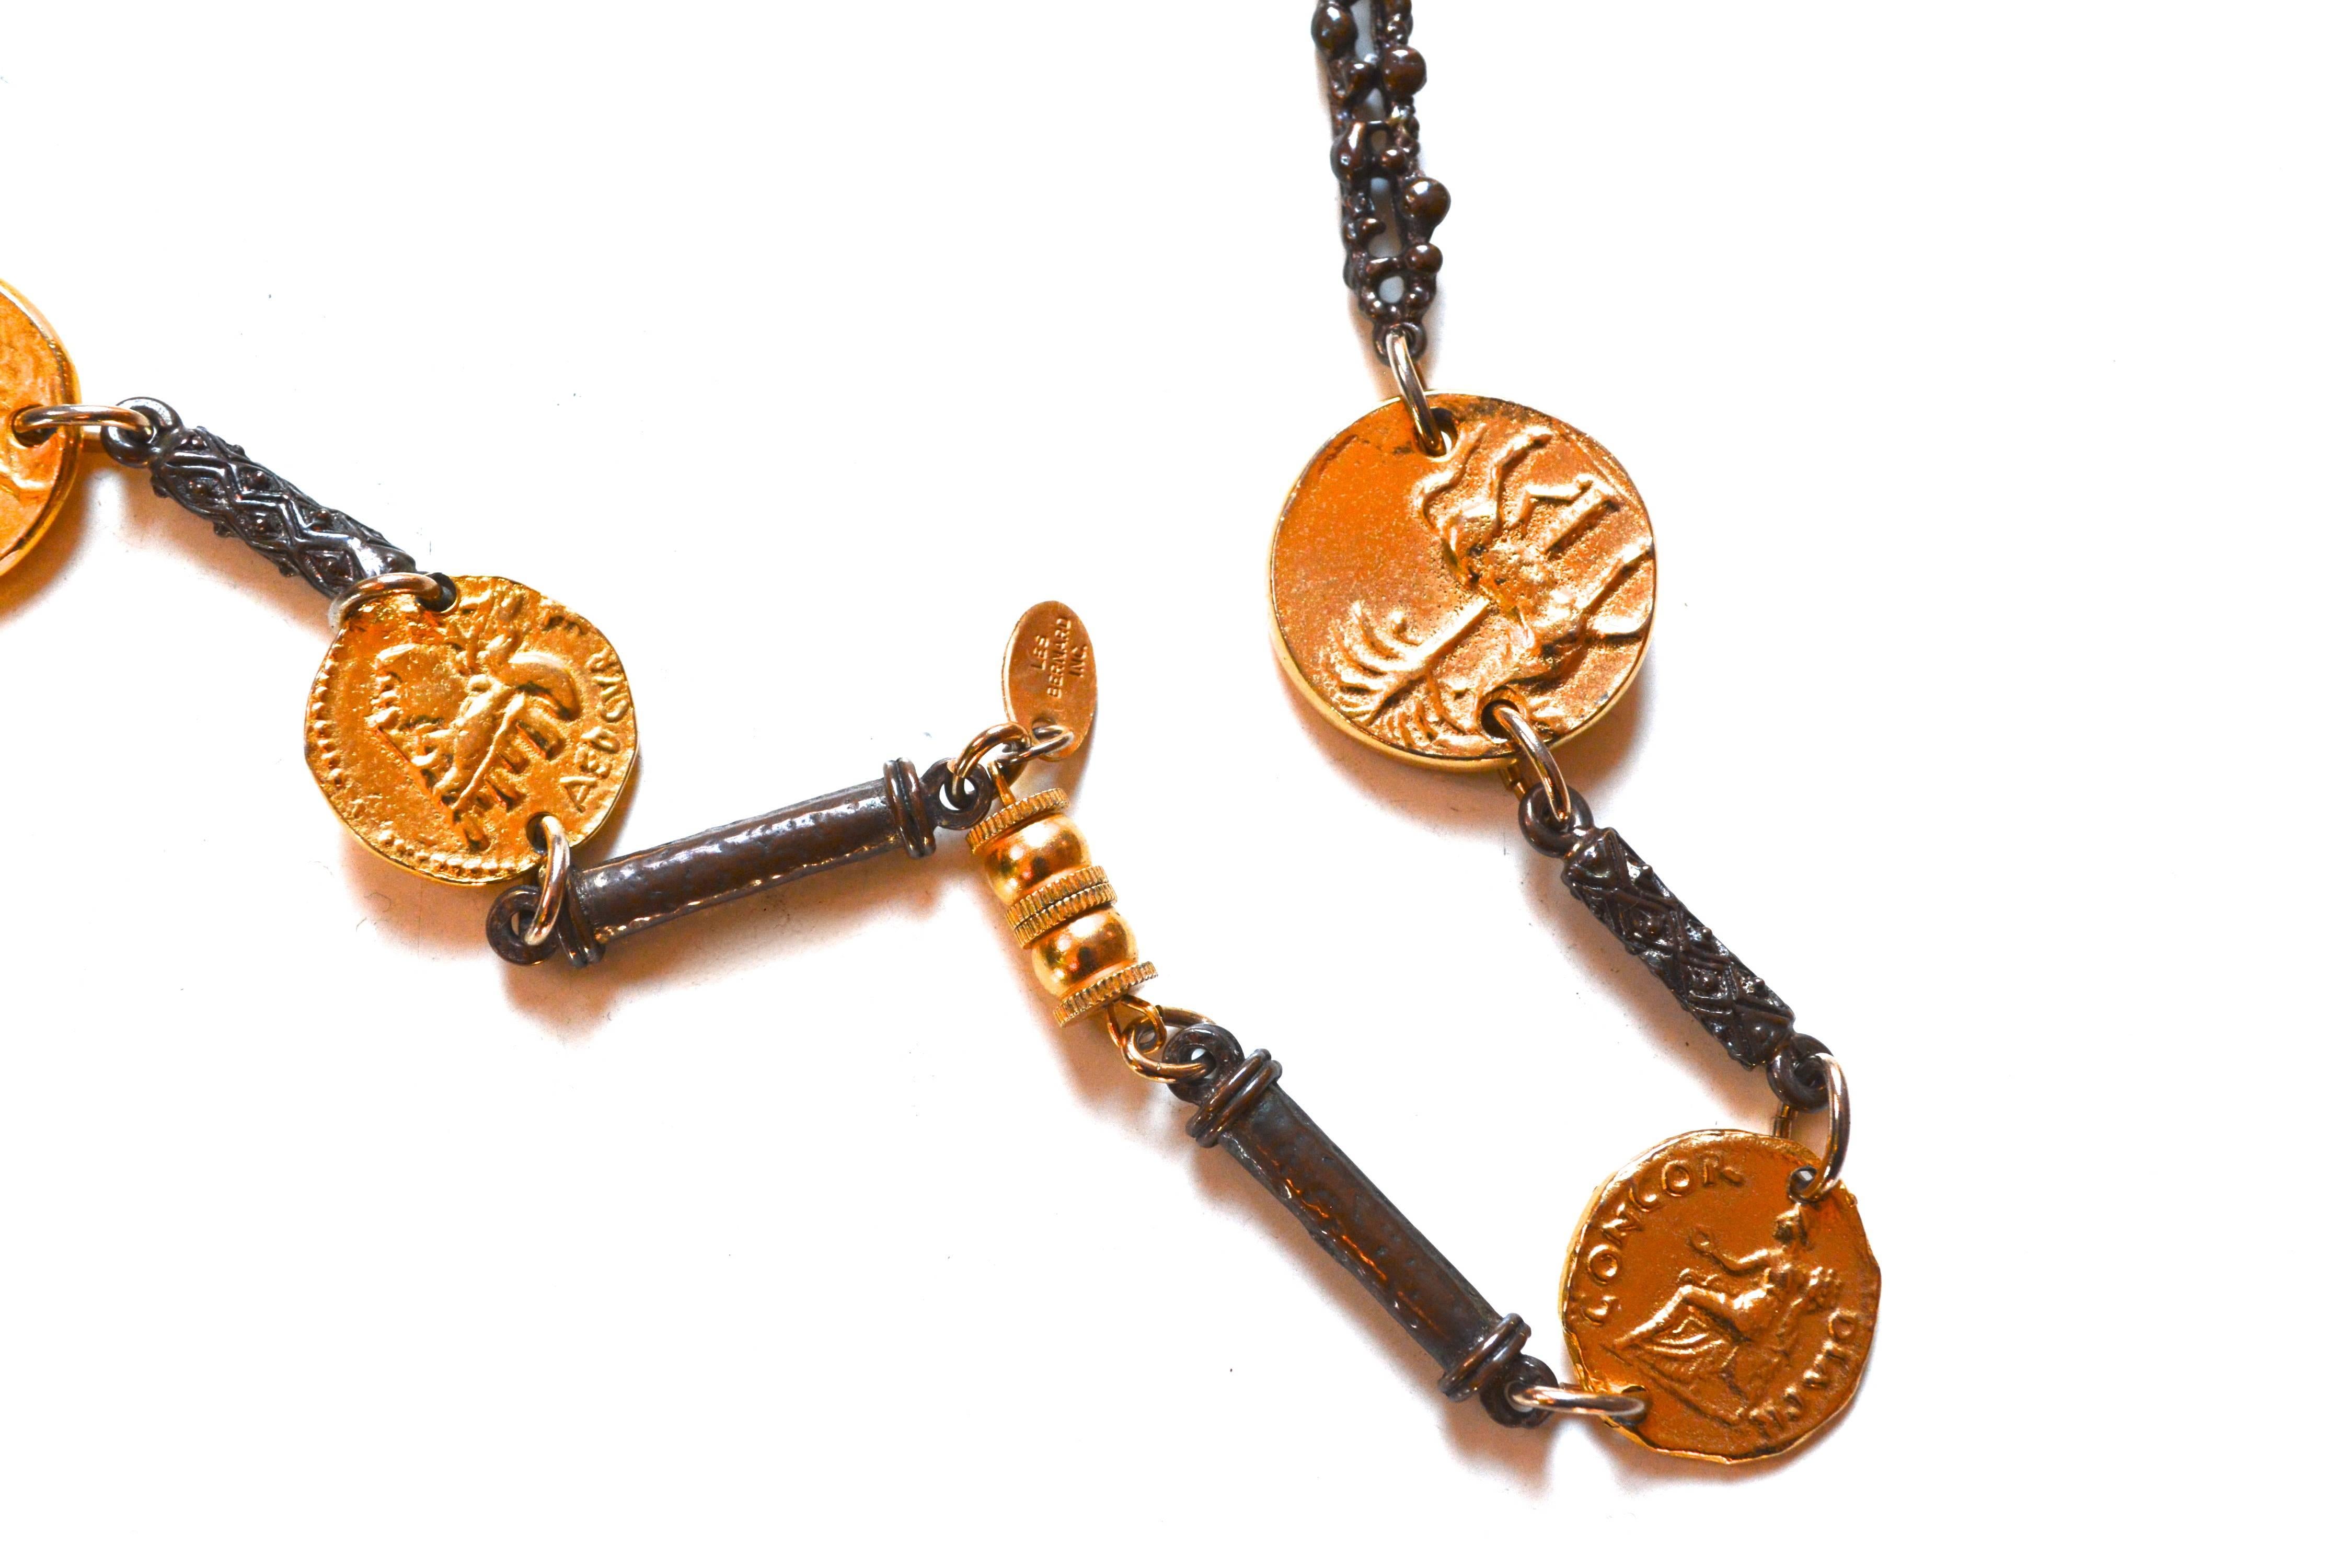 Signed Les Bernard gilt ancient coin style and aged metal knot link necklace. Unique detailed construction. The piece features various coin styles based on authentic historic artifacts. Largest center coin is 1